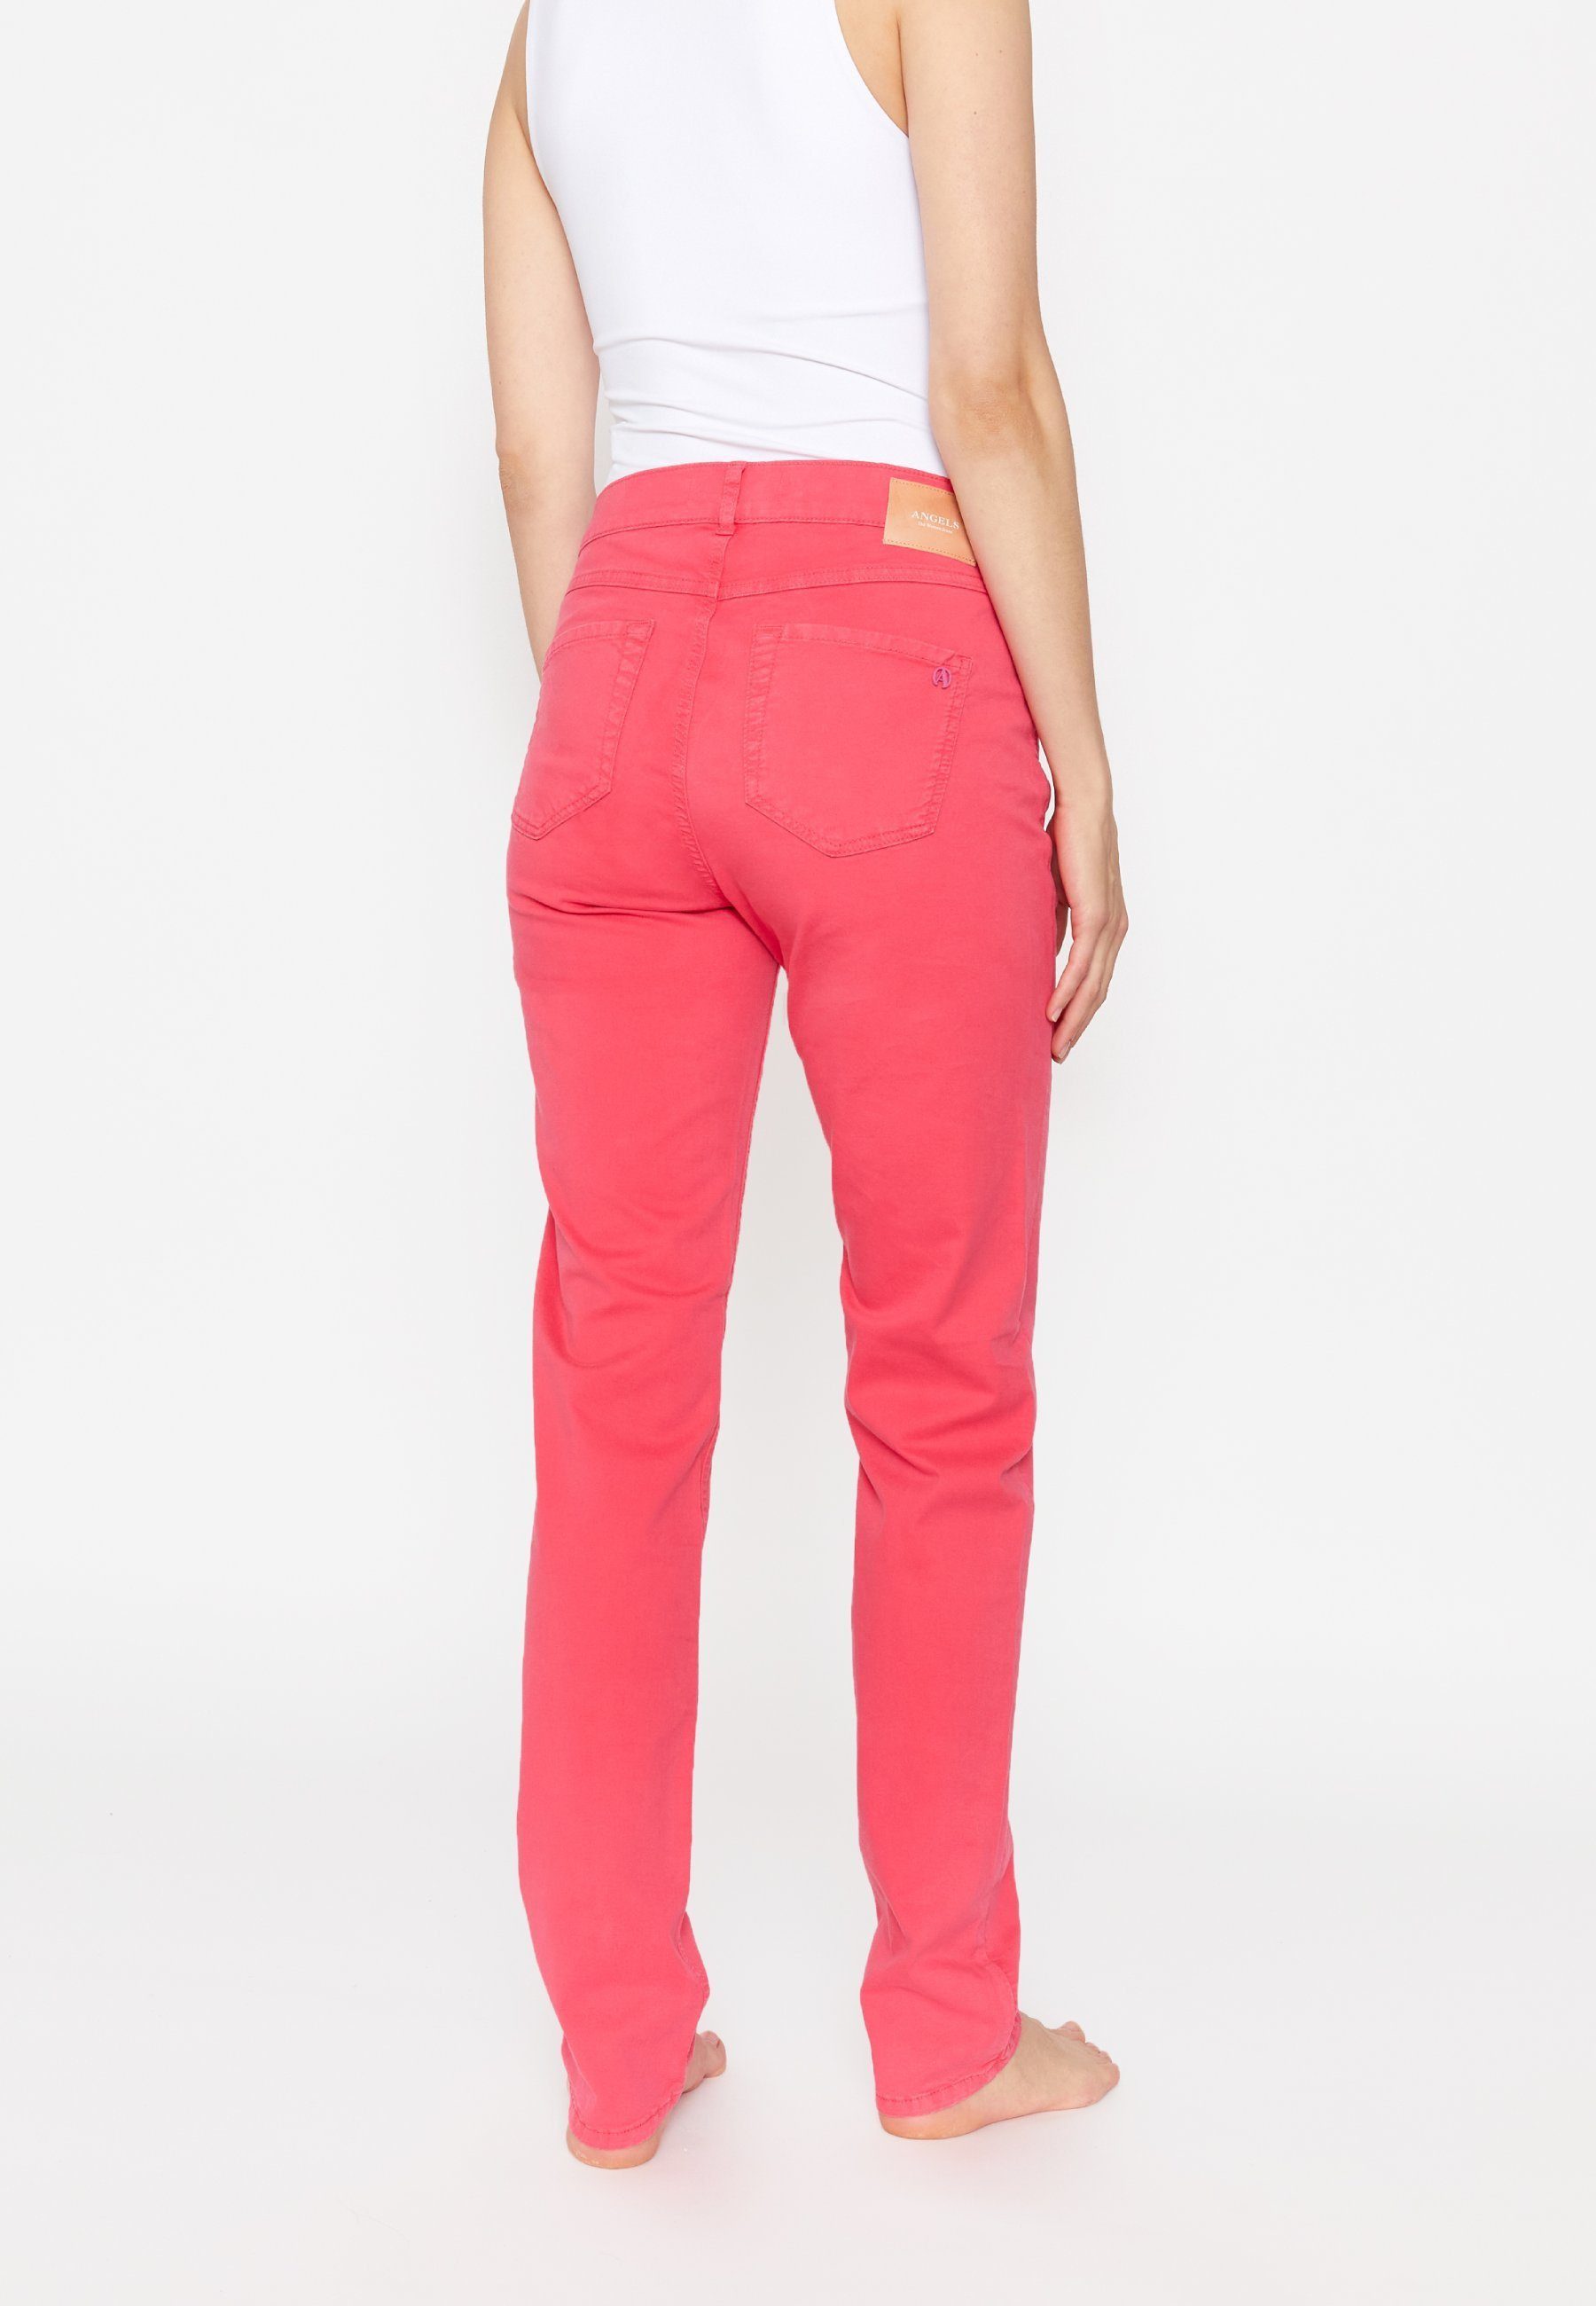 ANGELS Straight-Jeans Jeans Cici Ton-in-Ton-Nähte pink Denim Coloured mit